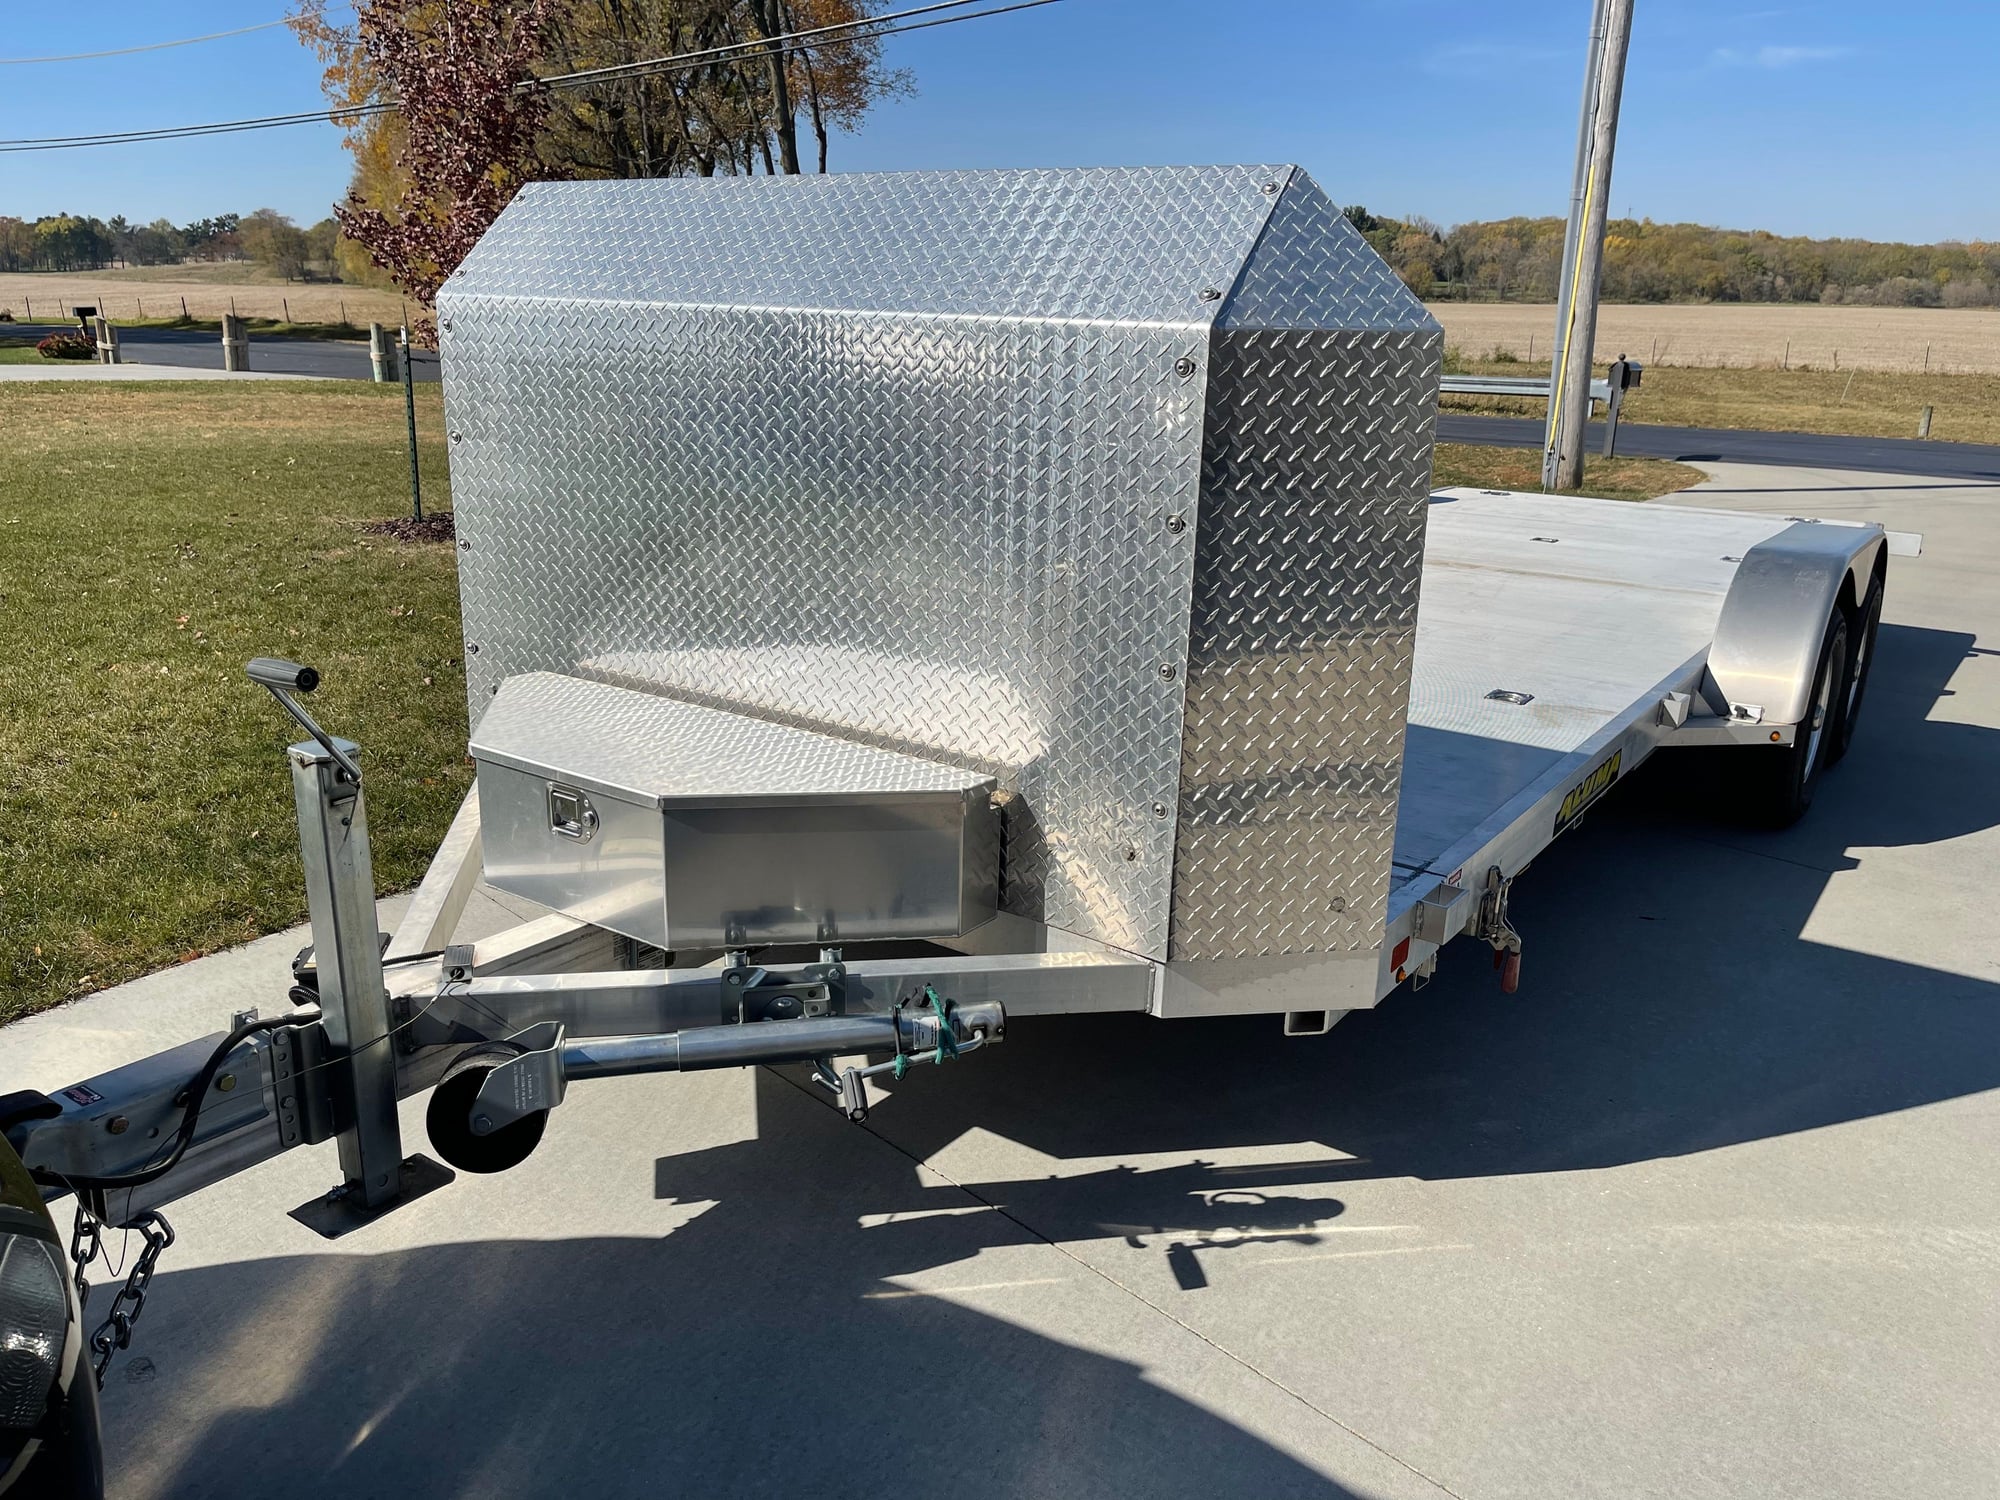 Miscellaneous - 2019 Aluma 8220 Tilt deck trailer - Used - 0  All Models - Sterling, IL 61081, United States